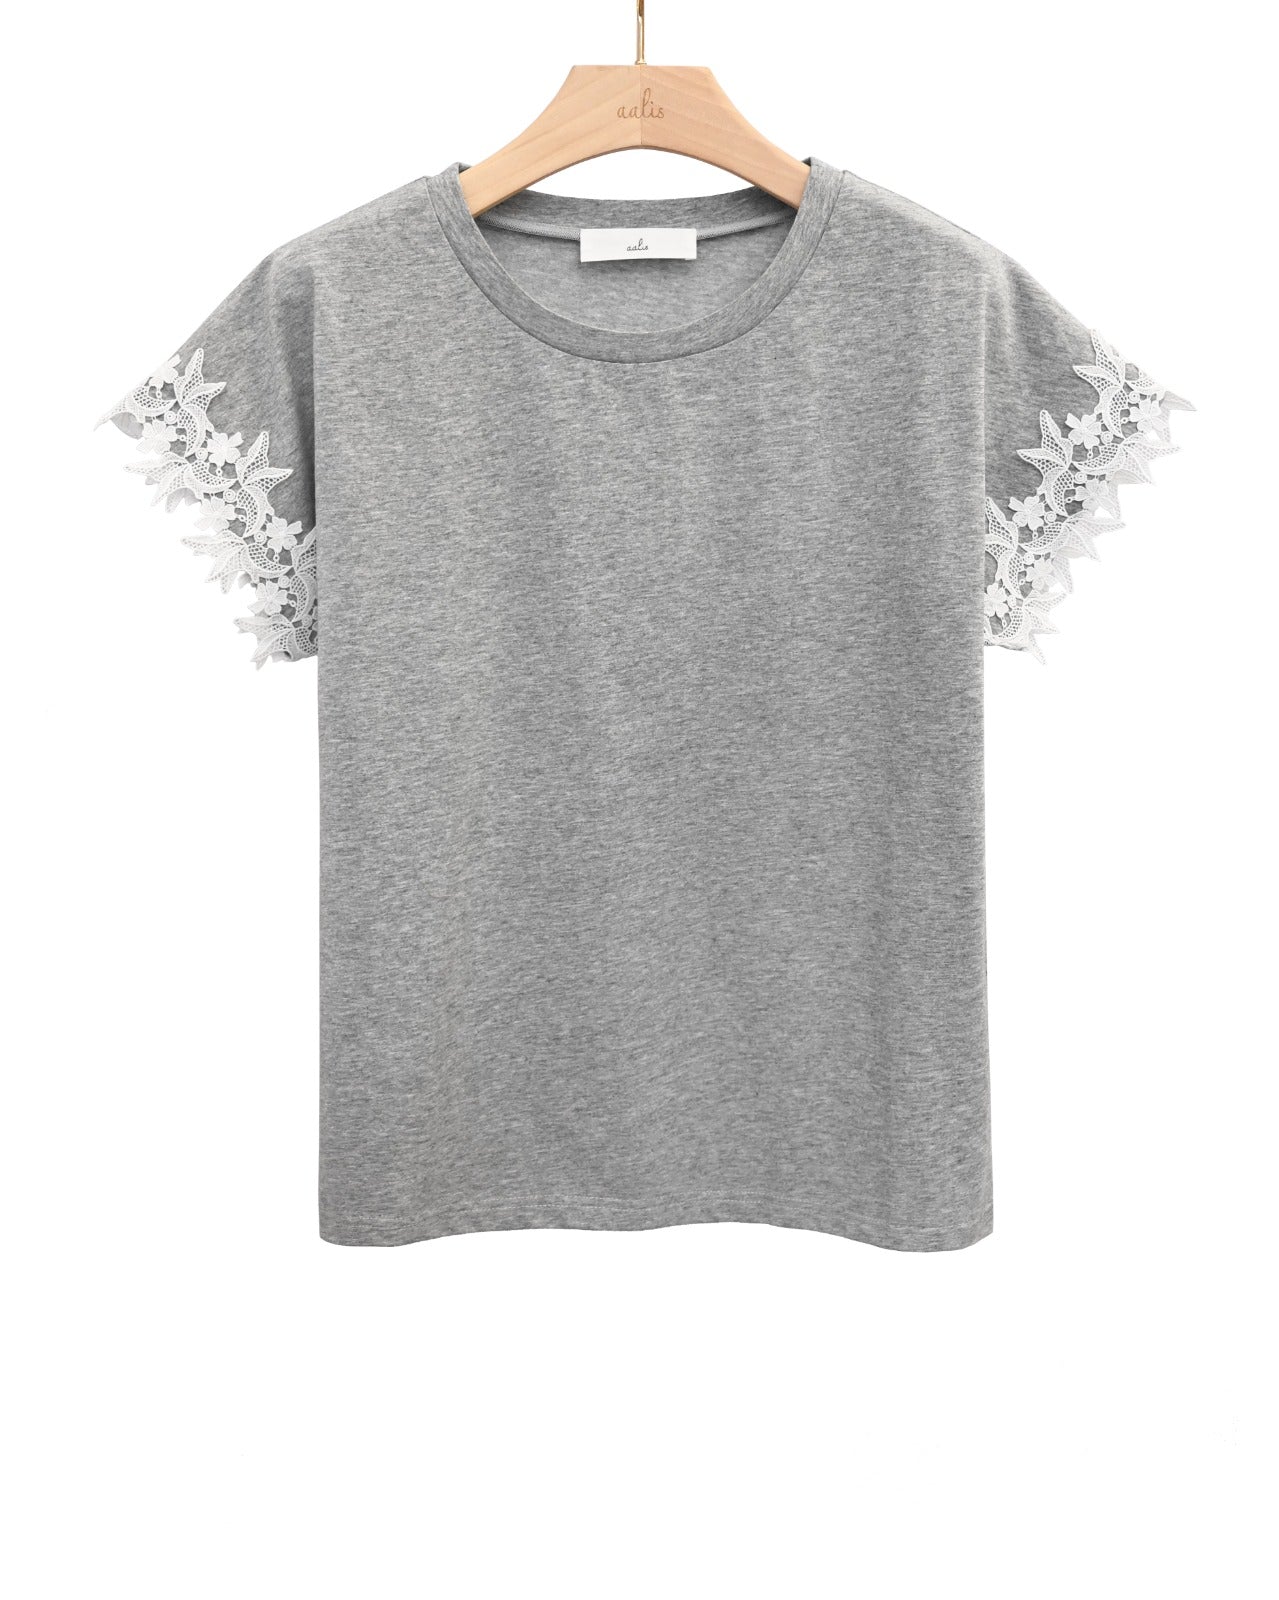 Load image into Gallery viewer, aalis KIO Batwing lace trim on sleeves Tee (Heather grey)
